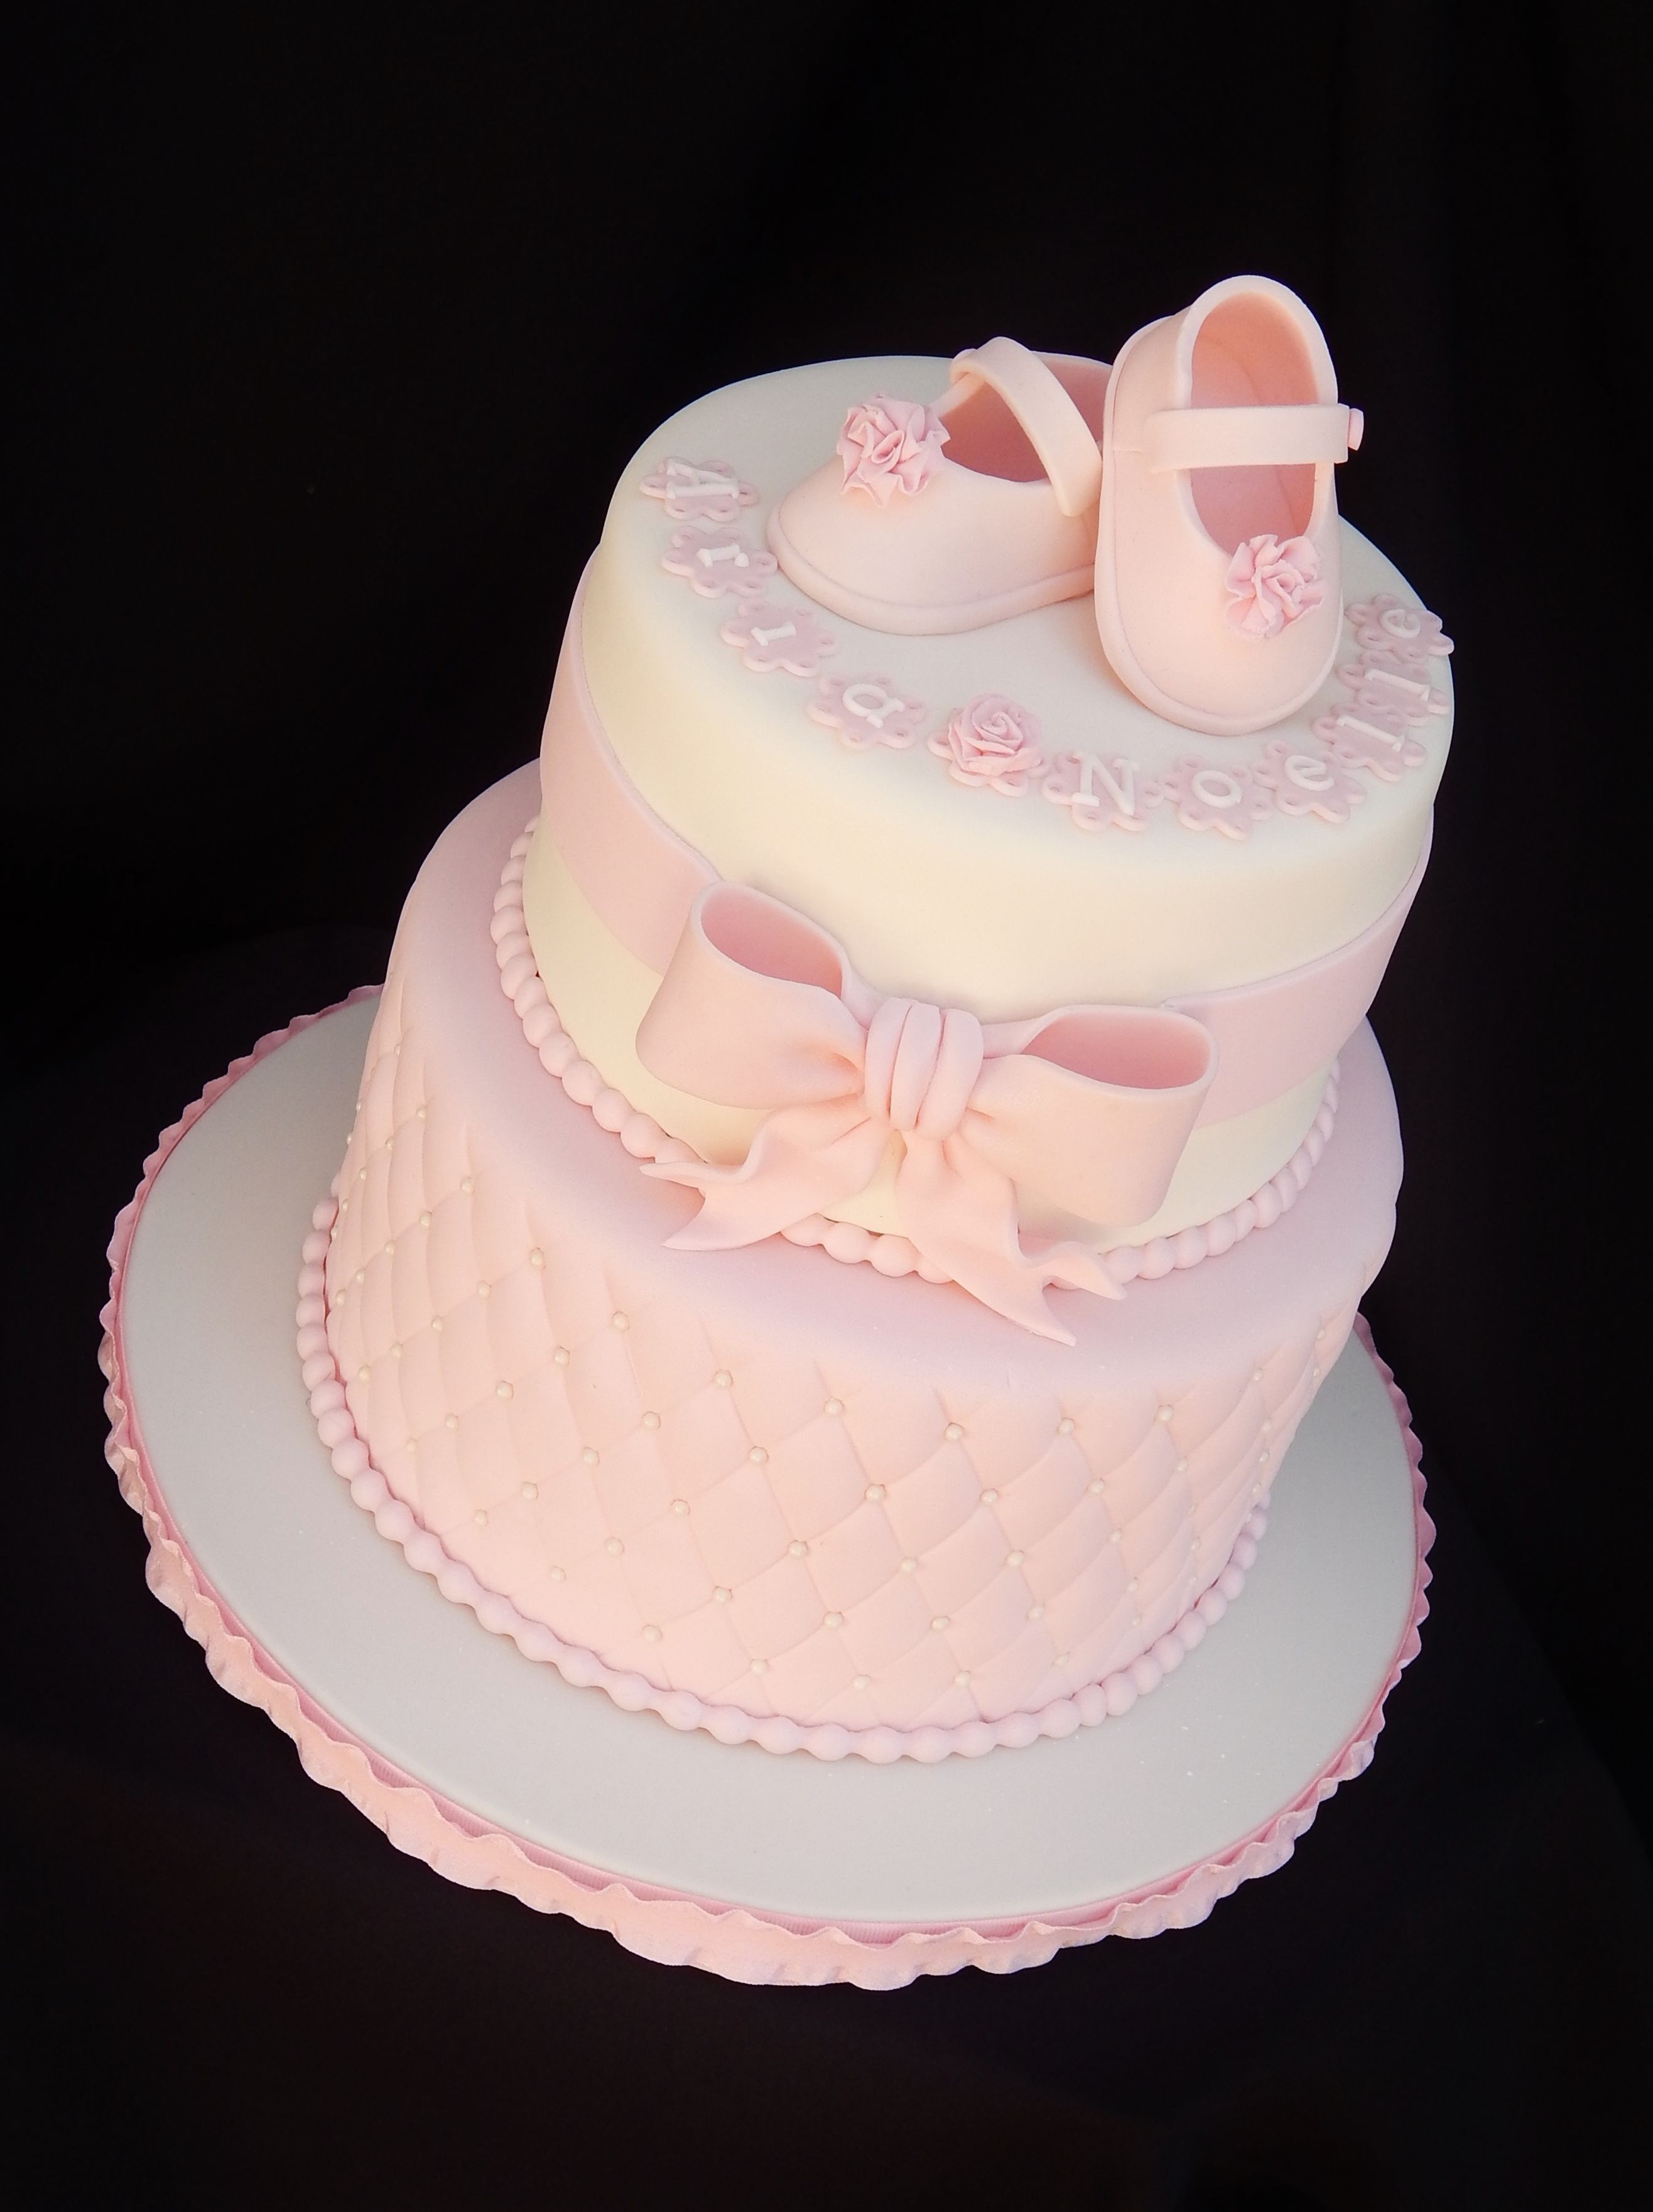 fondant baby shoes – 7/9 vanilla cake with raspberry filling – baby shower cake with quilted diamond pattern